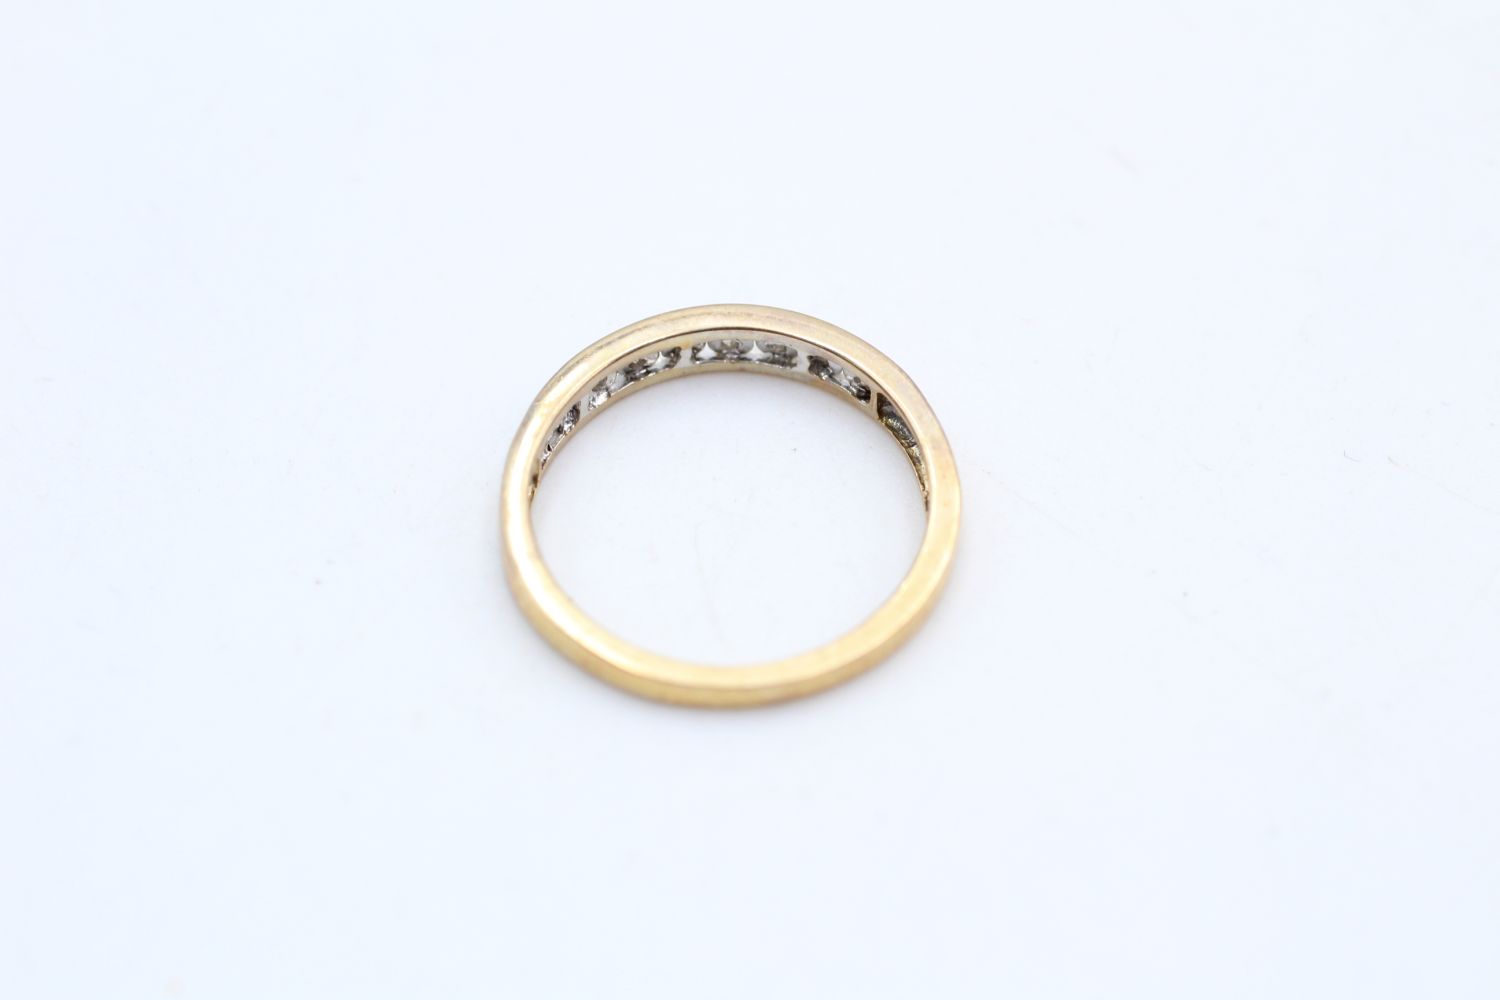 9ct gold vintage diamond nine stone channel setting ring (1.4g) - Image 4 of 4